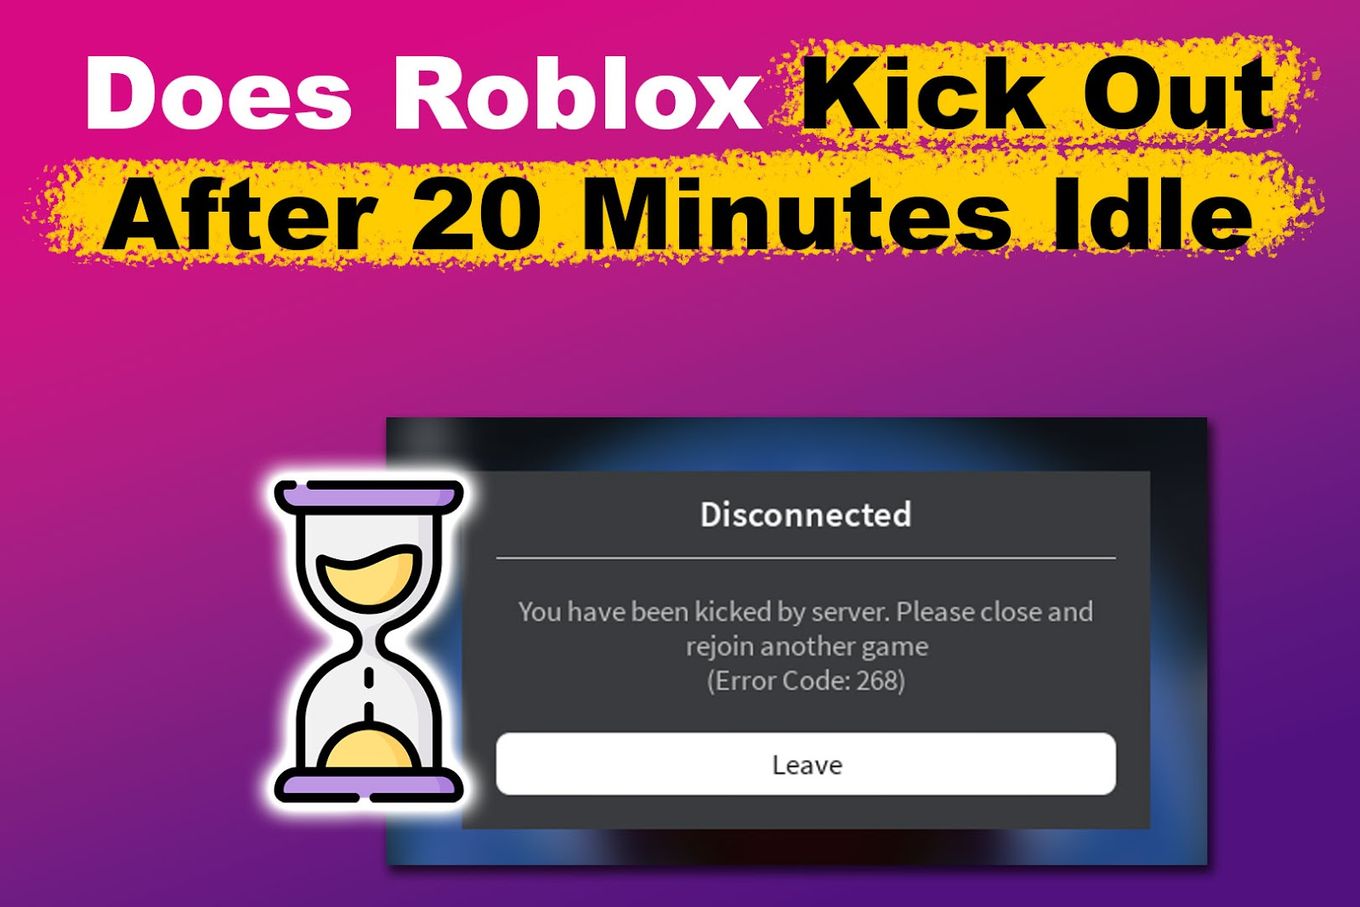 Does Roblox Kick Out After 20 Minutes Idle